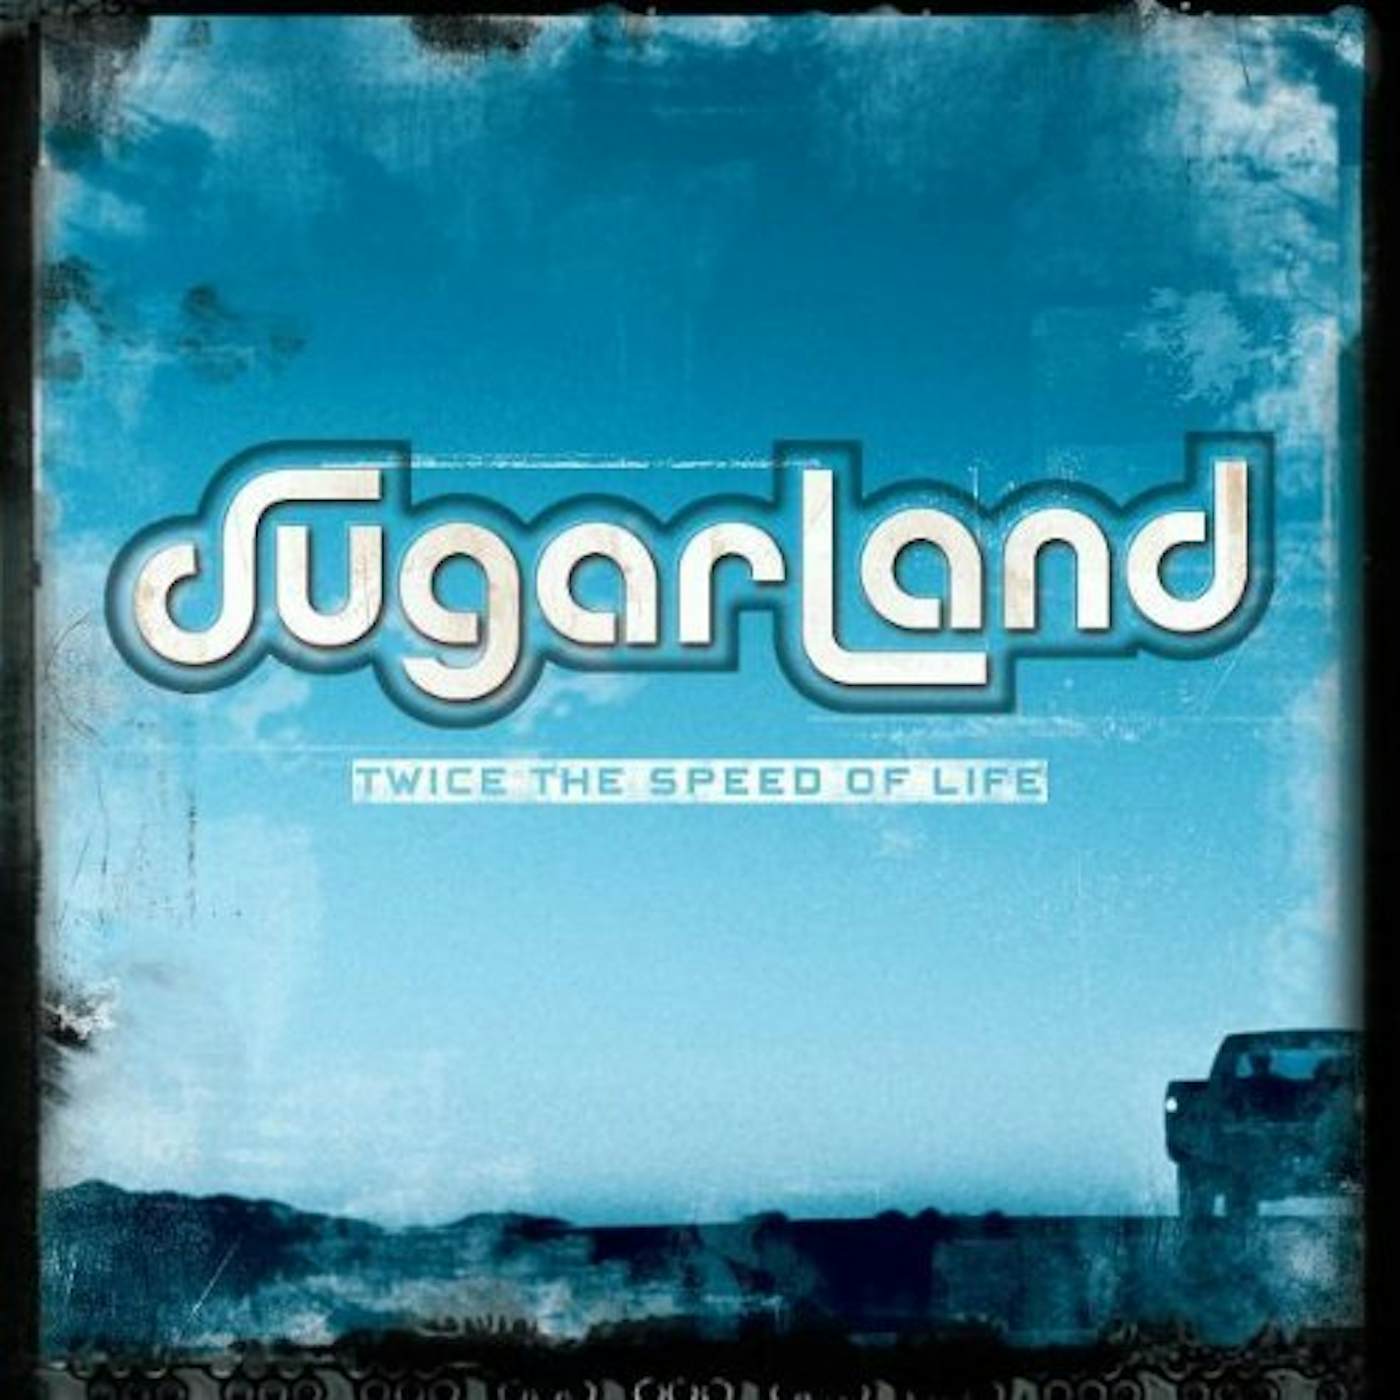 Sugarland TWICE THE SPEED OF LIFE CD